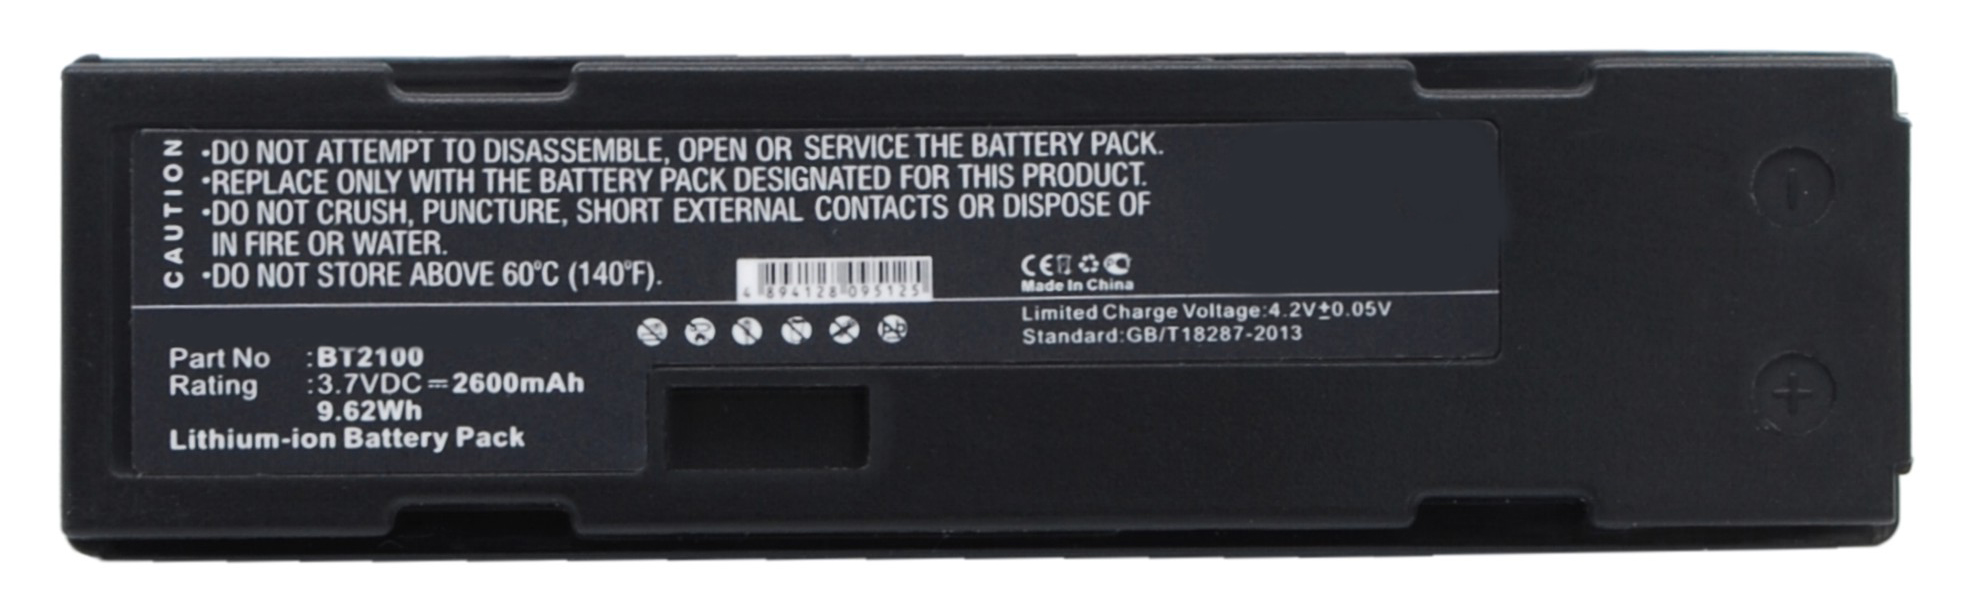 Batteries for CognexBarcode Scanner